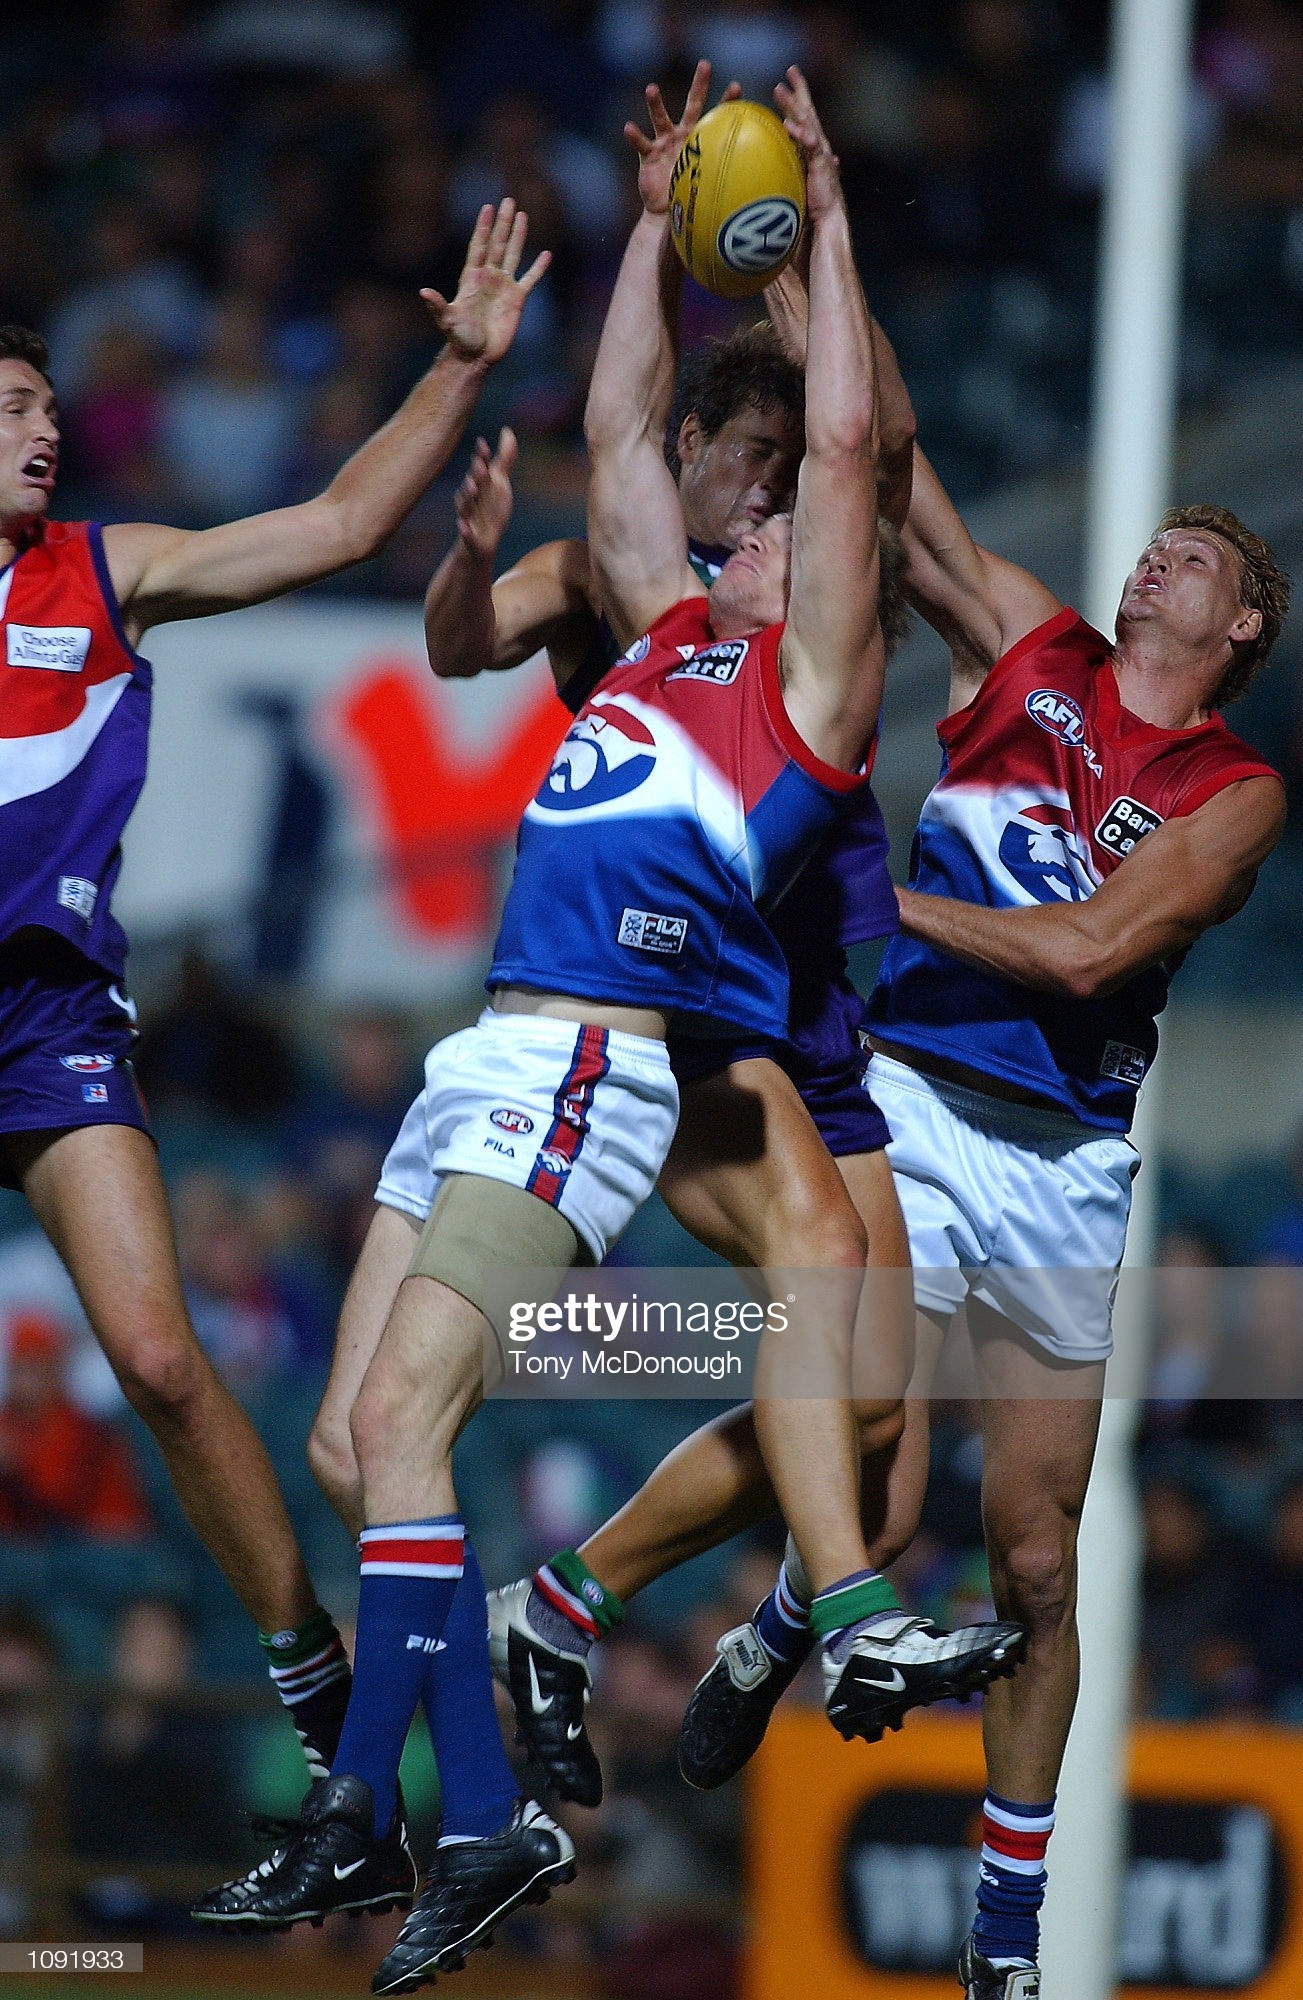 feb-2002-trent-bartlett-for-the-western-bulldogs-marks-the-ball-the-picture-id1091933